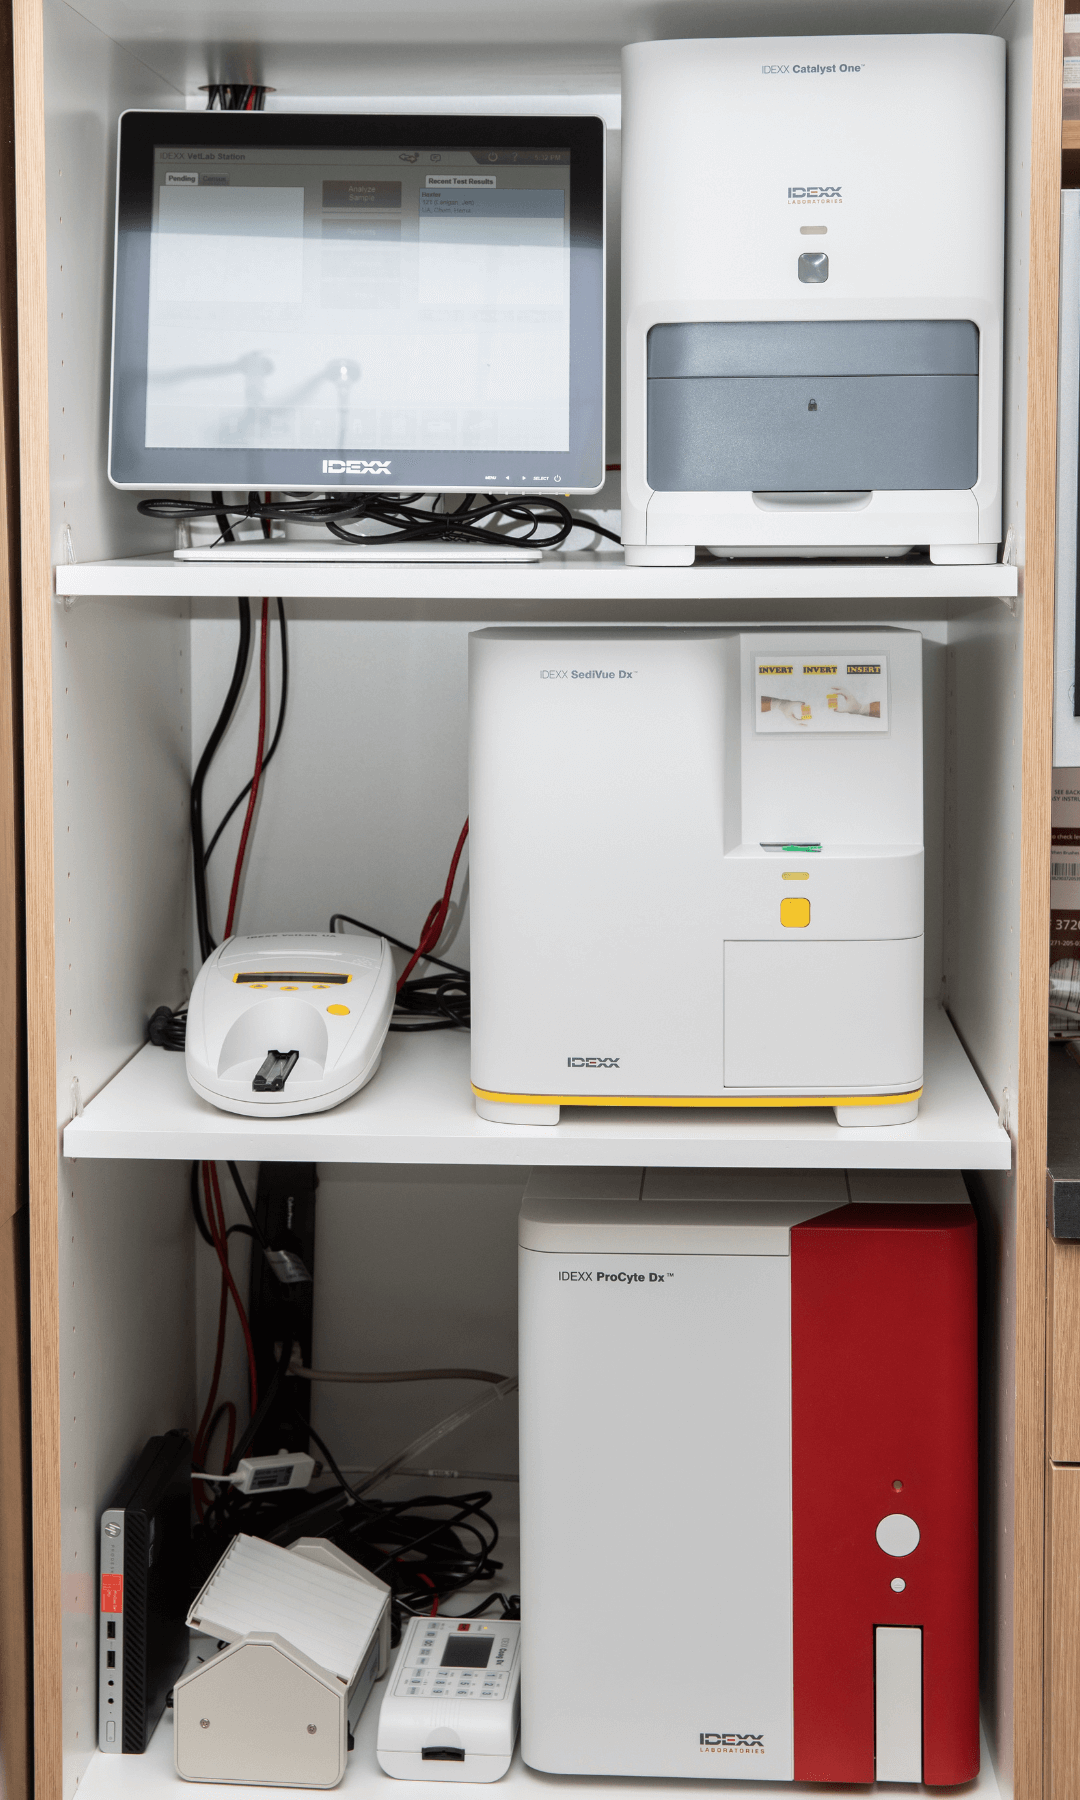 Machines in In-house diagnostic laboratory